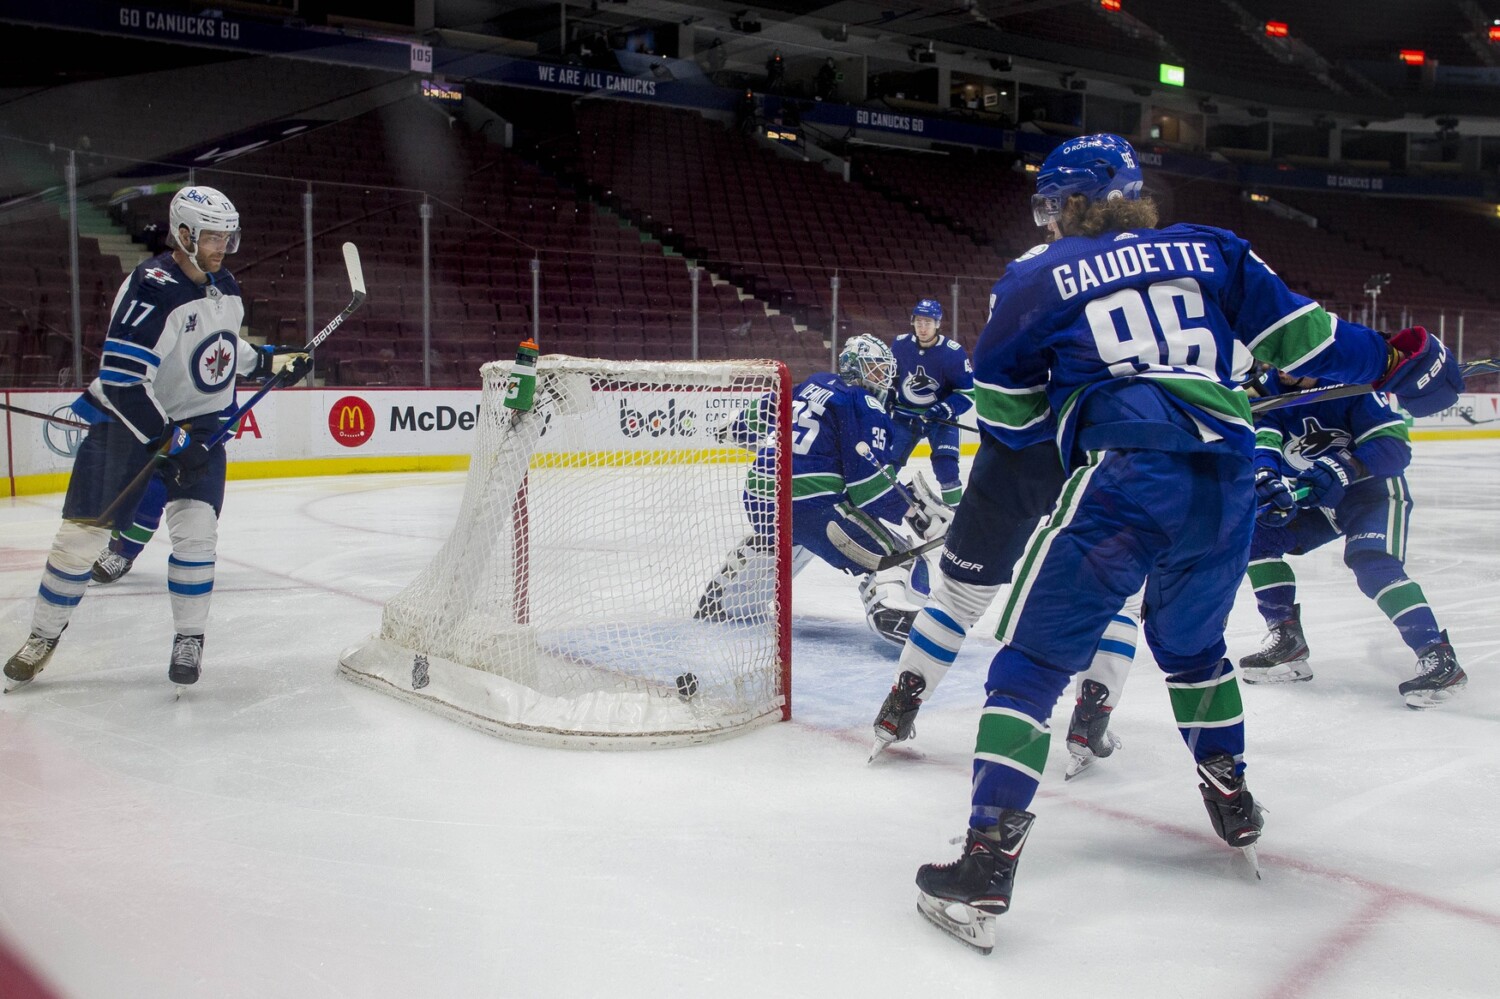 NHL News: Calgary Flames, COVID Protocol, Canucks Re-Opening Delayed, and McCarron Suspended